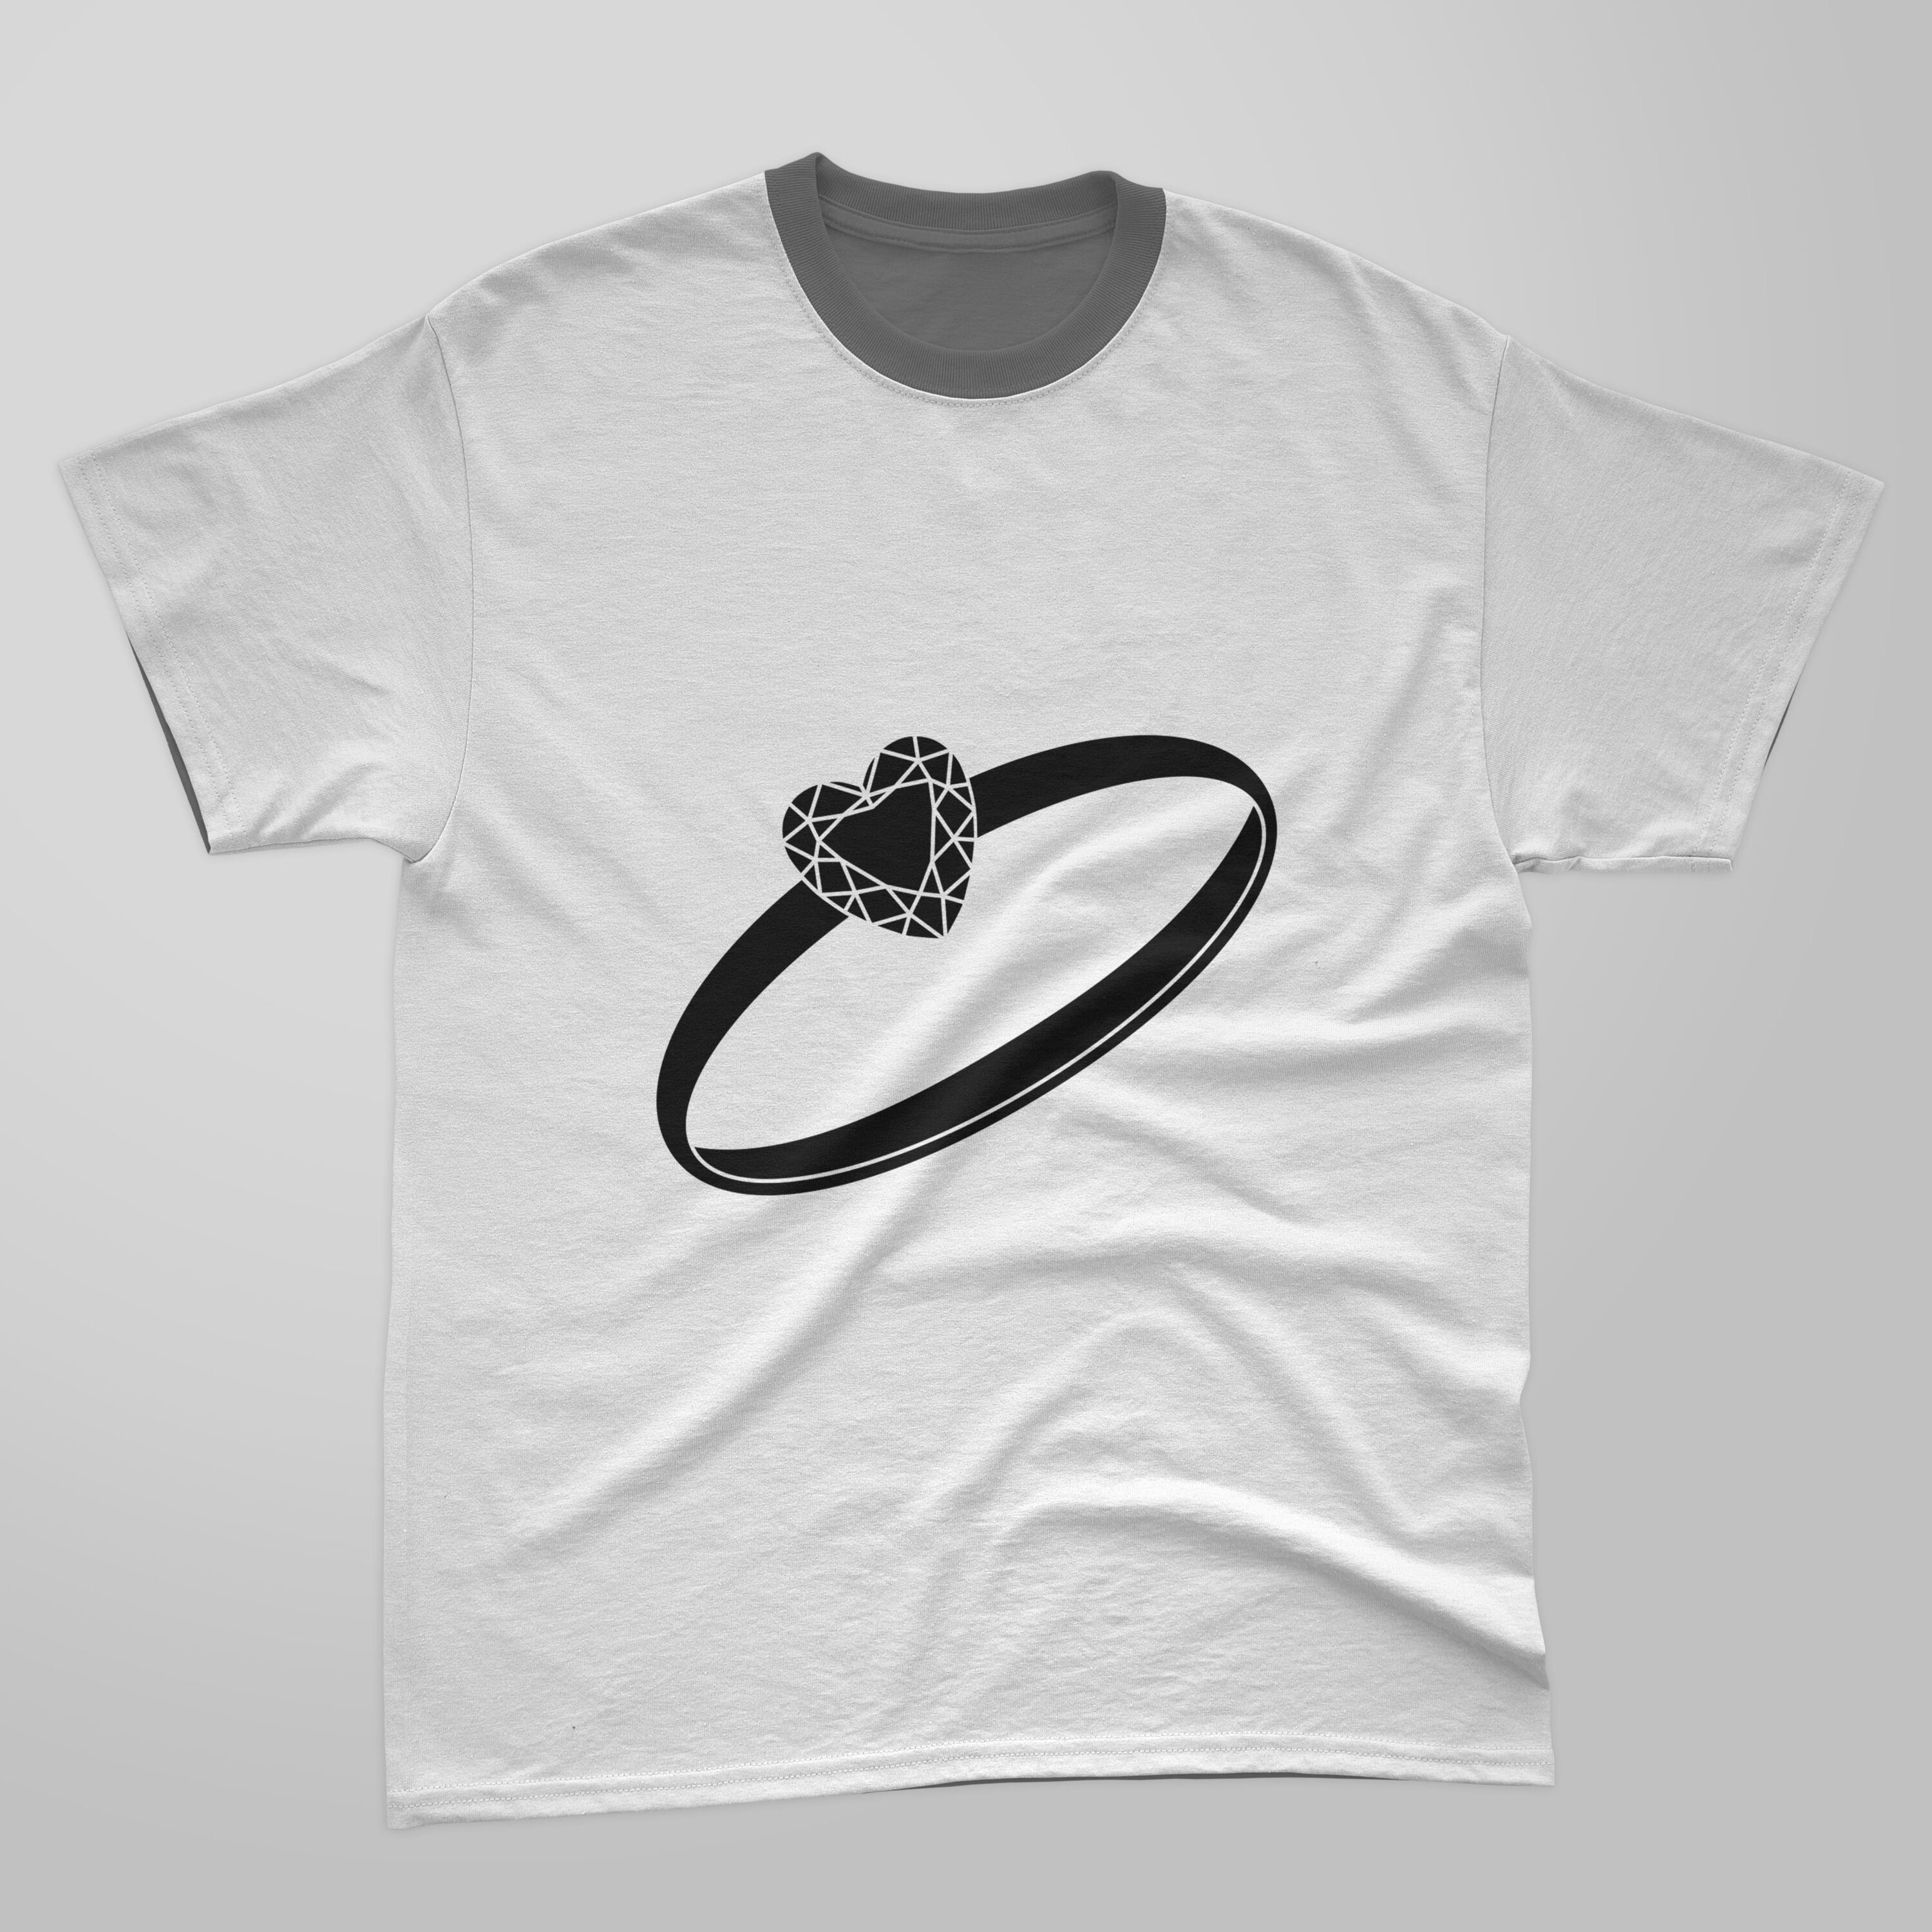 Image of t-shirt with elegant print of diamond ring silhouette.